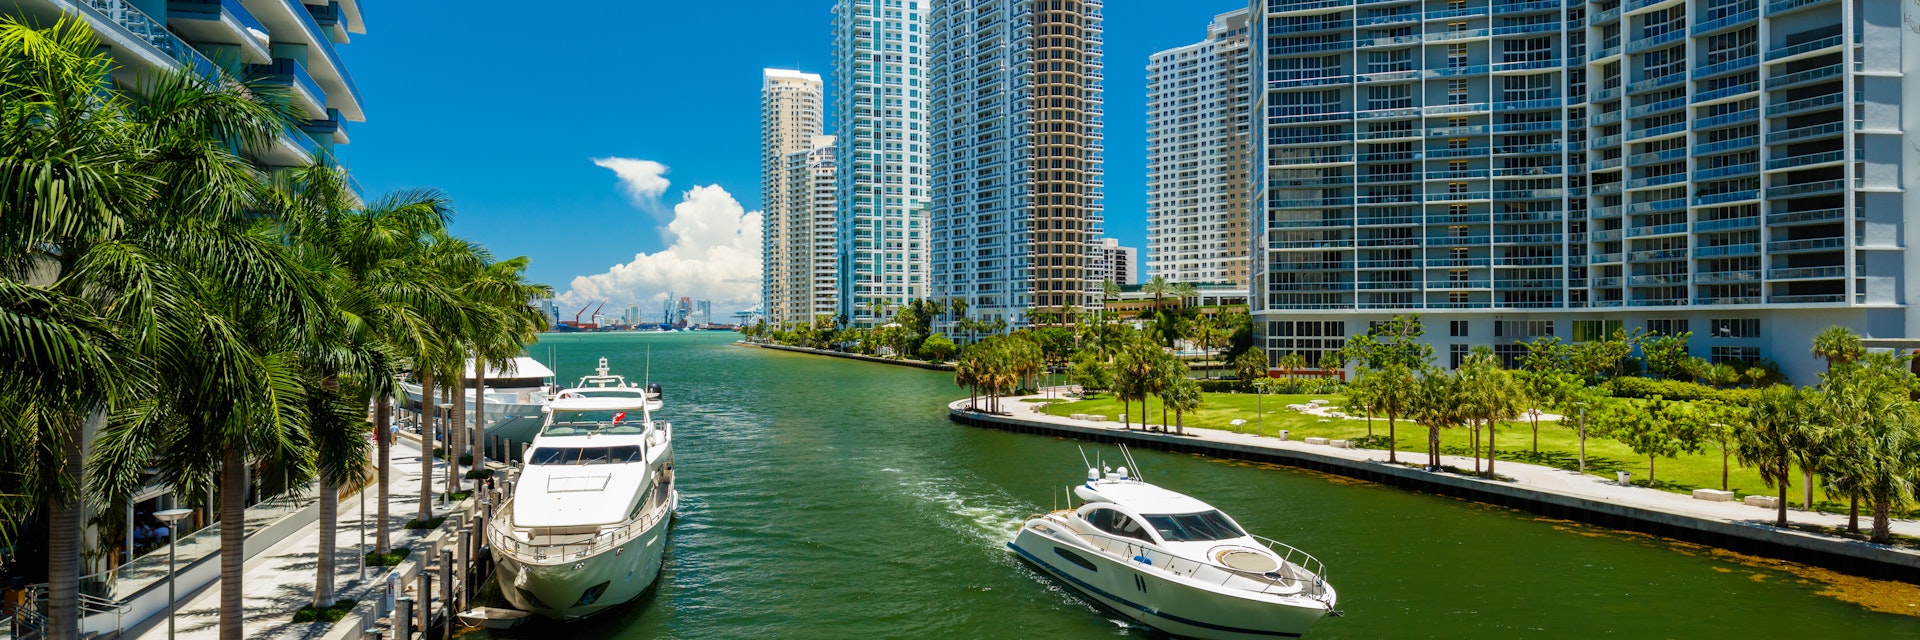 Downtown Miami along the Miami River inlet with Brickell Key in the background and yacht cruising by.
289314128
outdoor, downtown, skyscraper, metropolitan, usa, river, day, urban, condominium, sunny, luxury, skyline, yacht, condo, building, miami, modern, dock, metropolis, boating, lifestyle, architecture, city, colorful, beauty, boat, beautiful, water, nature, pretty, florida, vacation, inlet, landscape, cityscape, riverwalk, destination, shore, key, travel, brickell, united, states, blue, sky, bay, side